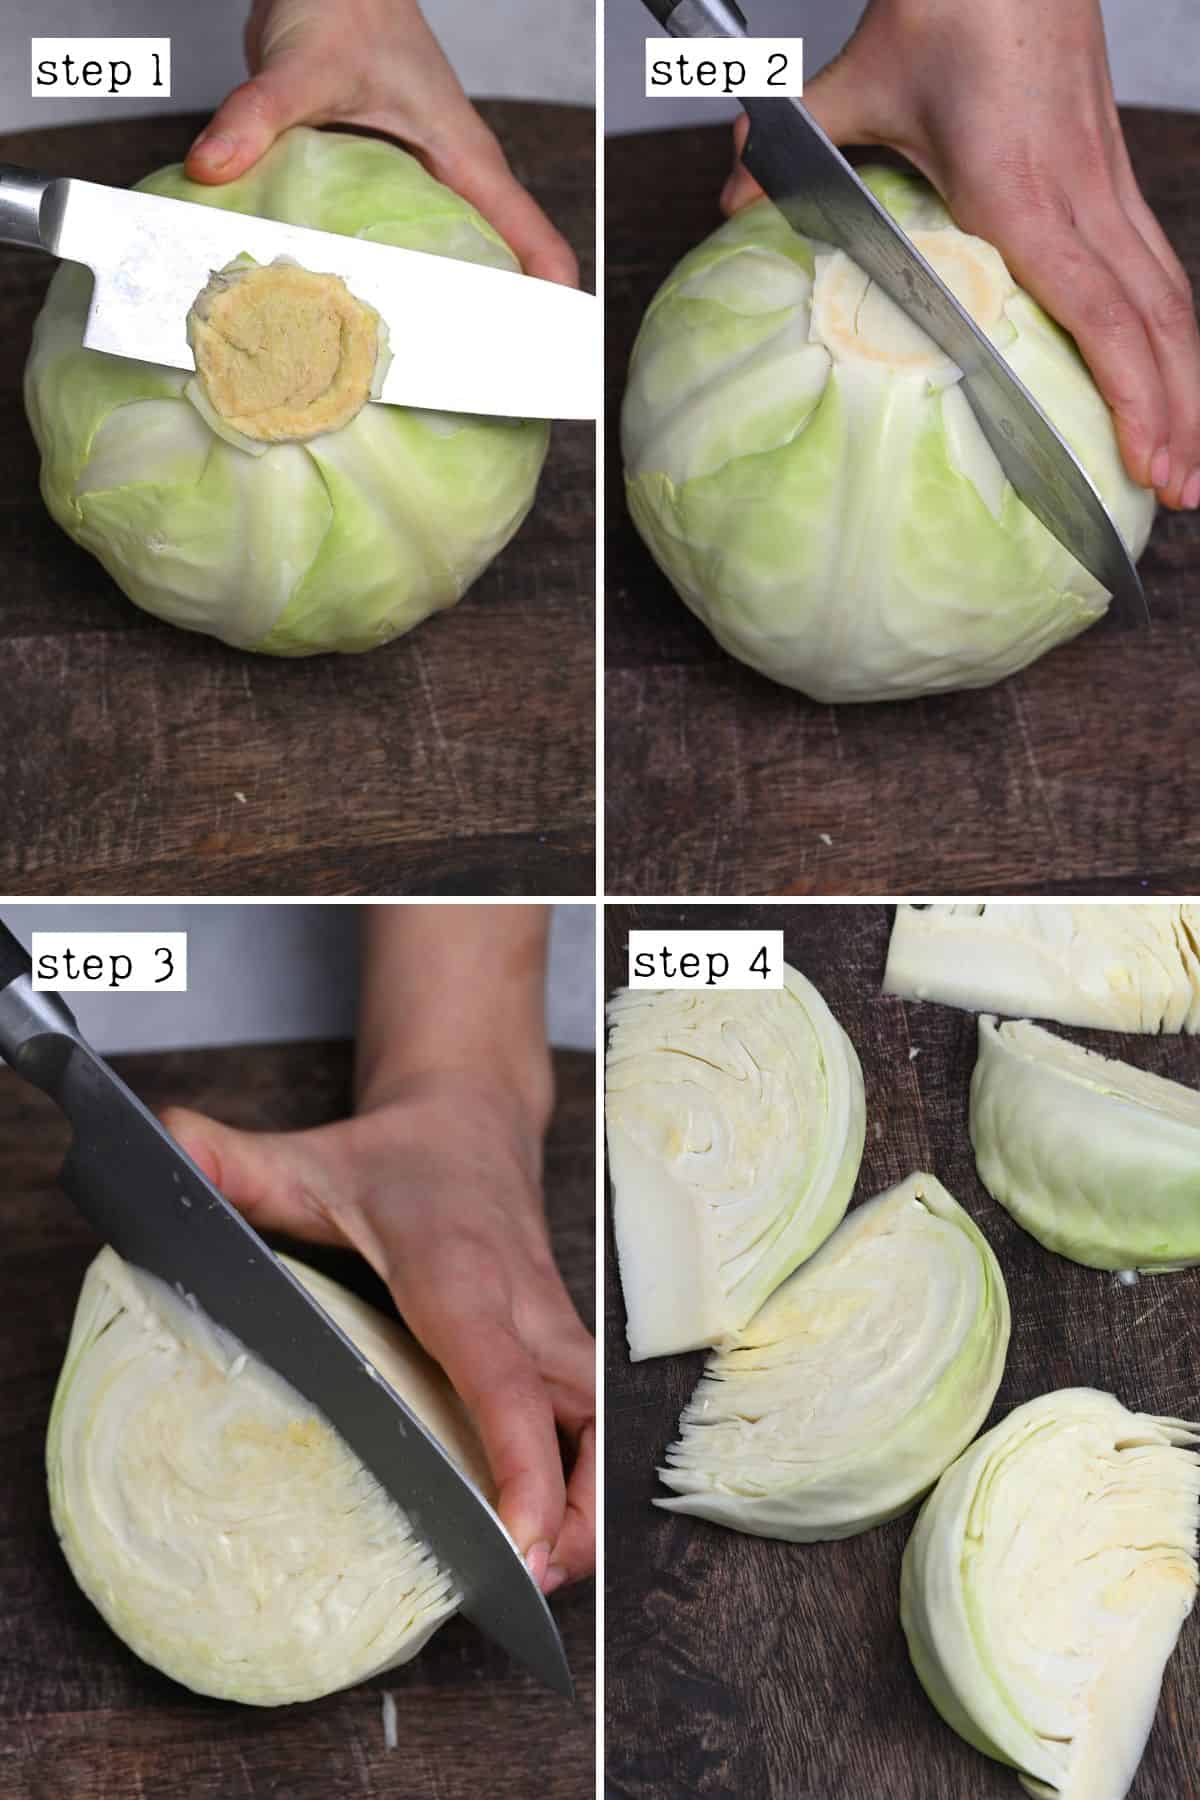 Steps for cutting cabbage